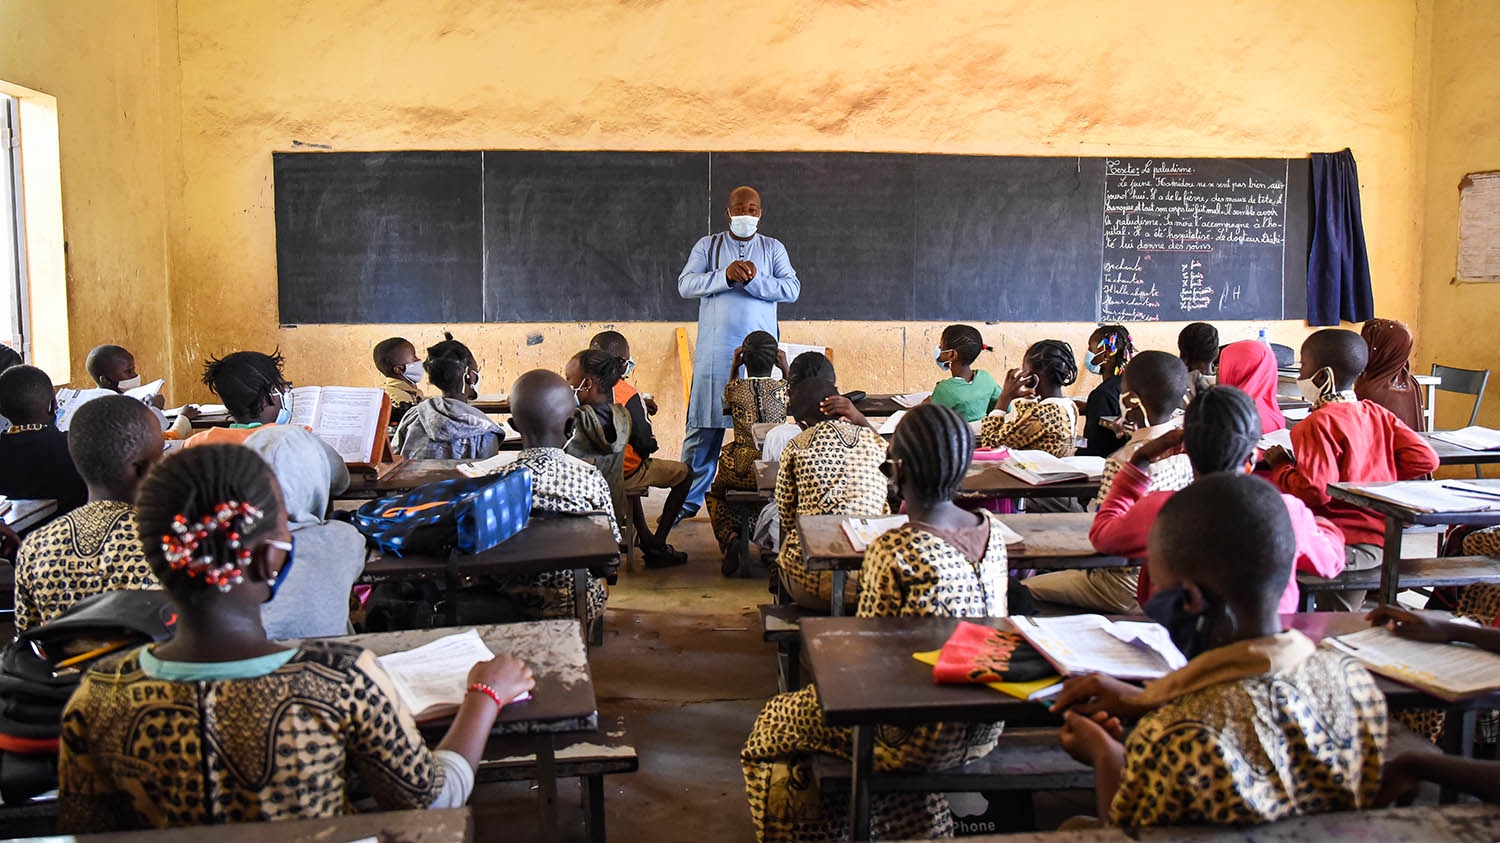 A teacher stands in front of pupils in a classroom.